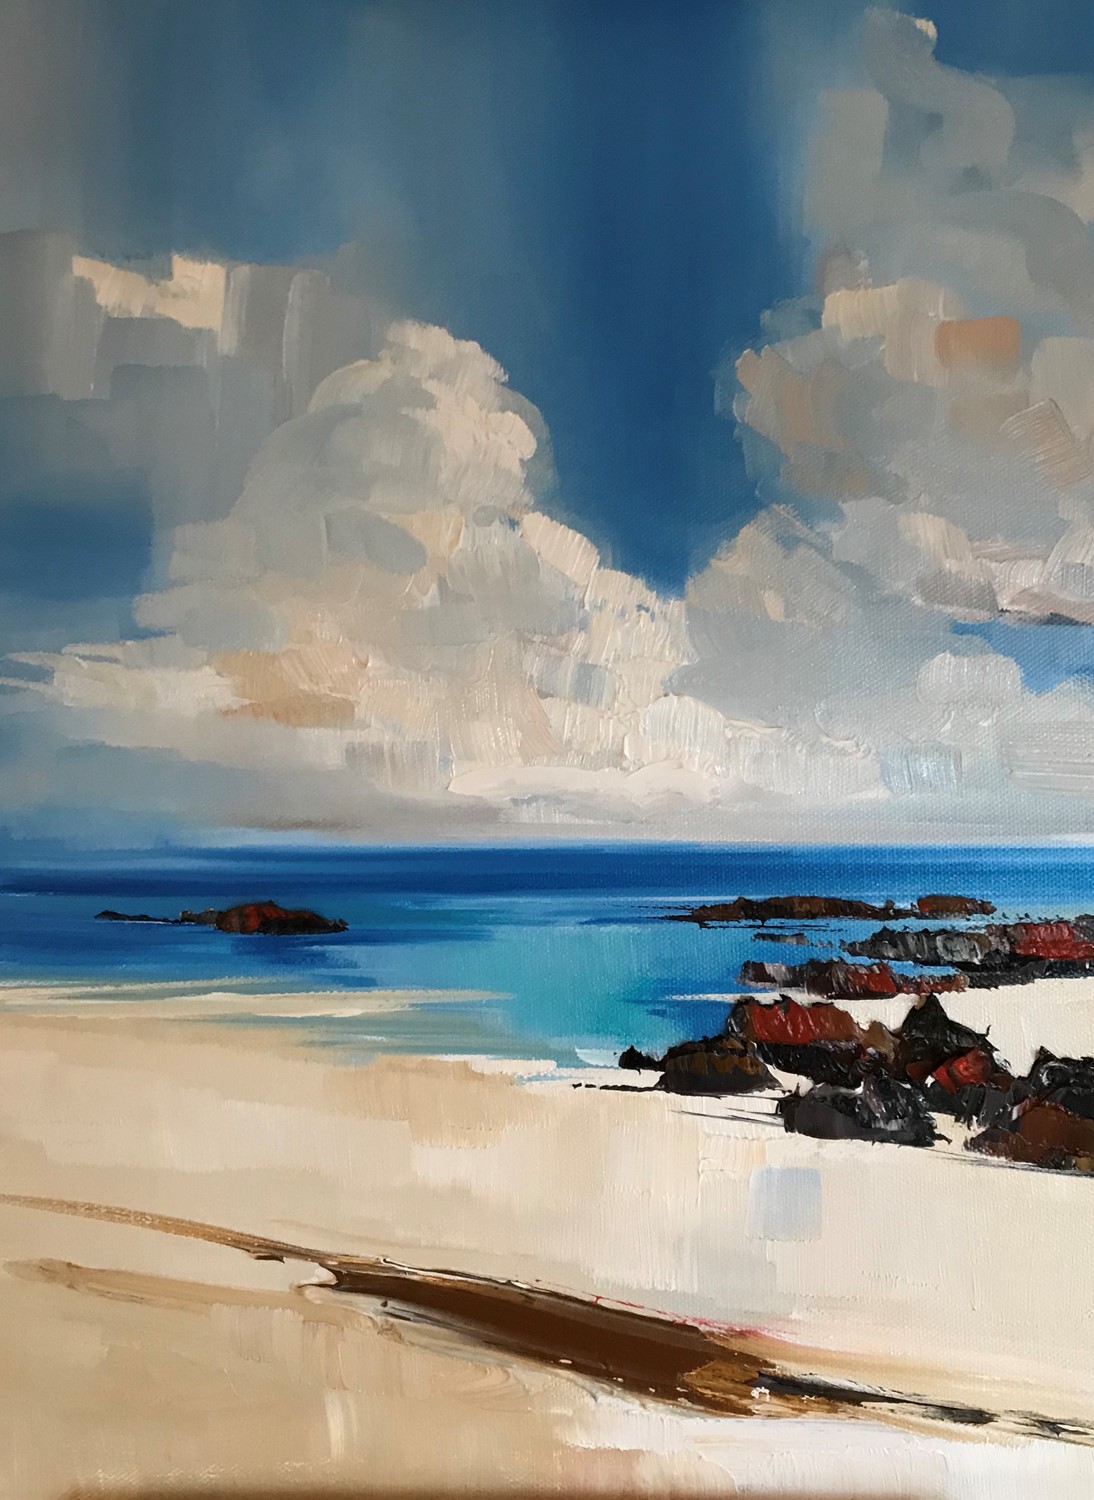 'Capturing the ever changing clouds' by artist Rosanne Barr